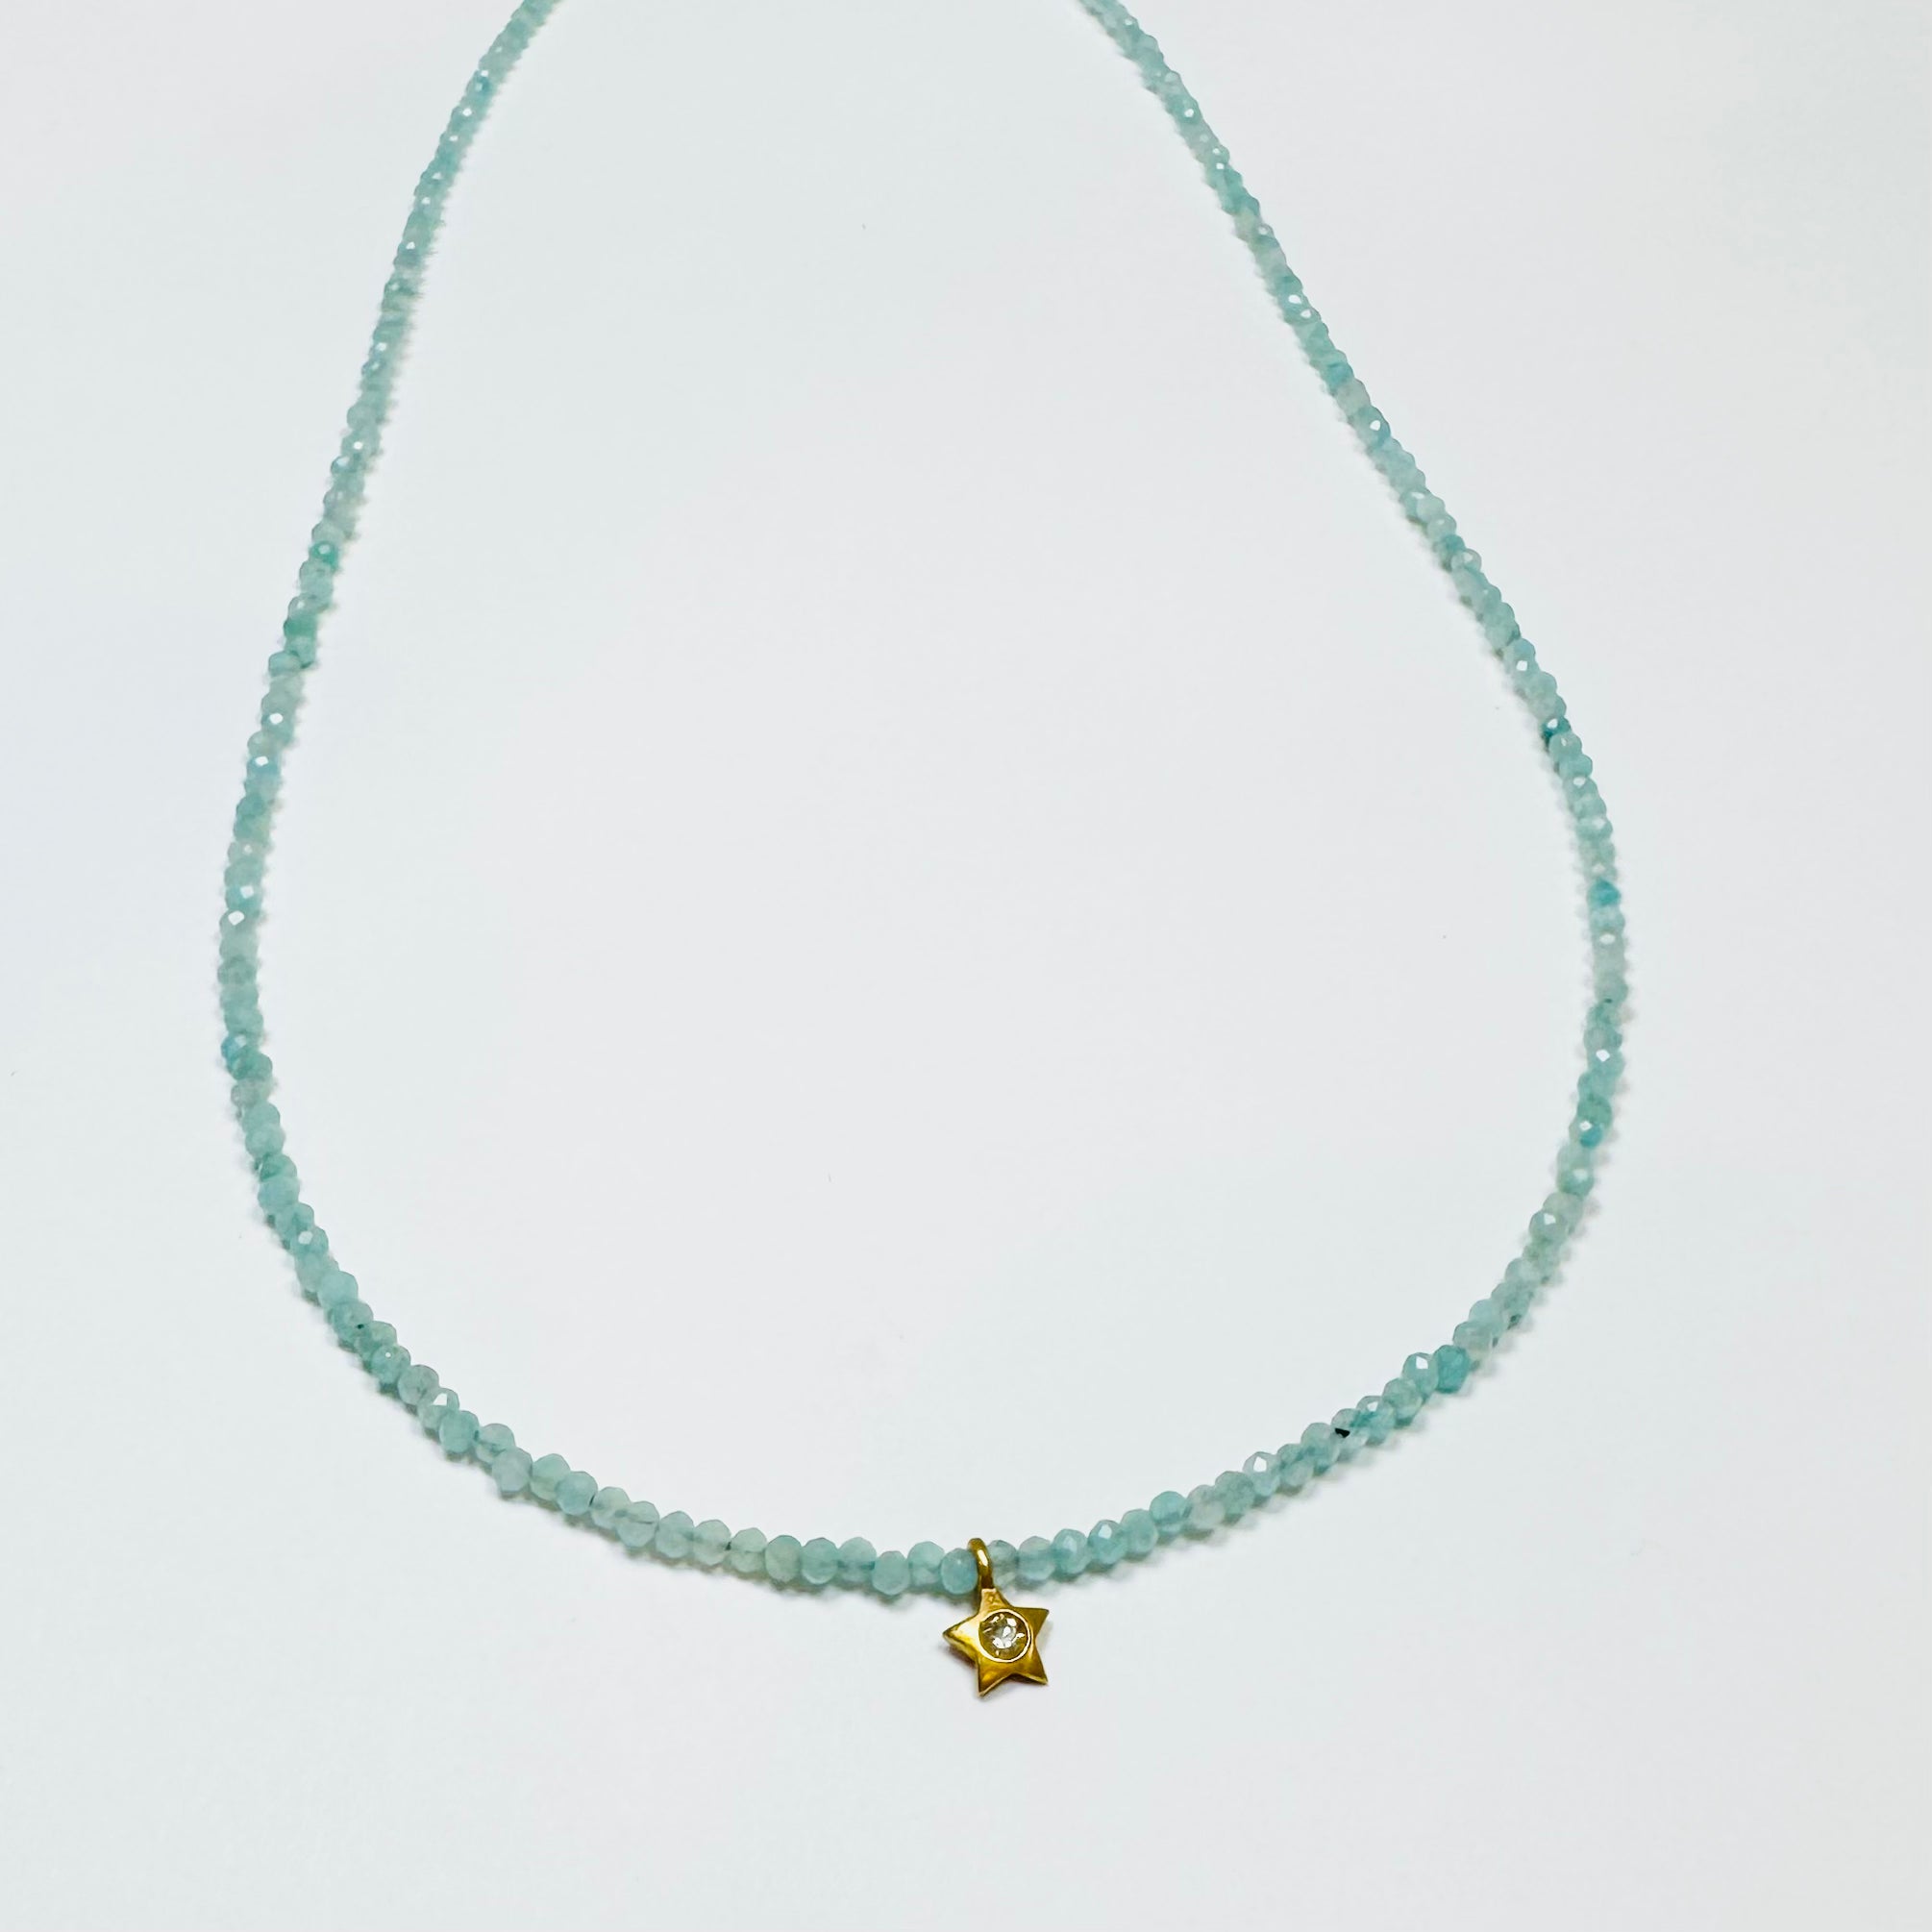 delicate ice blue opal necklace with diamond star charm